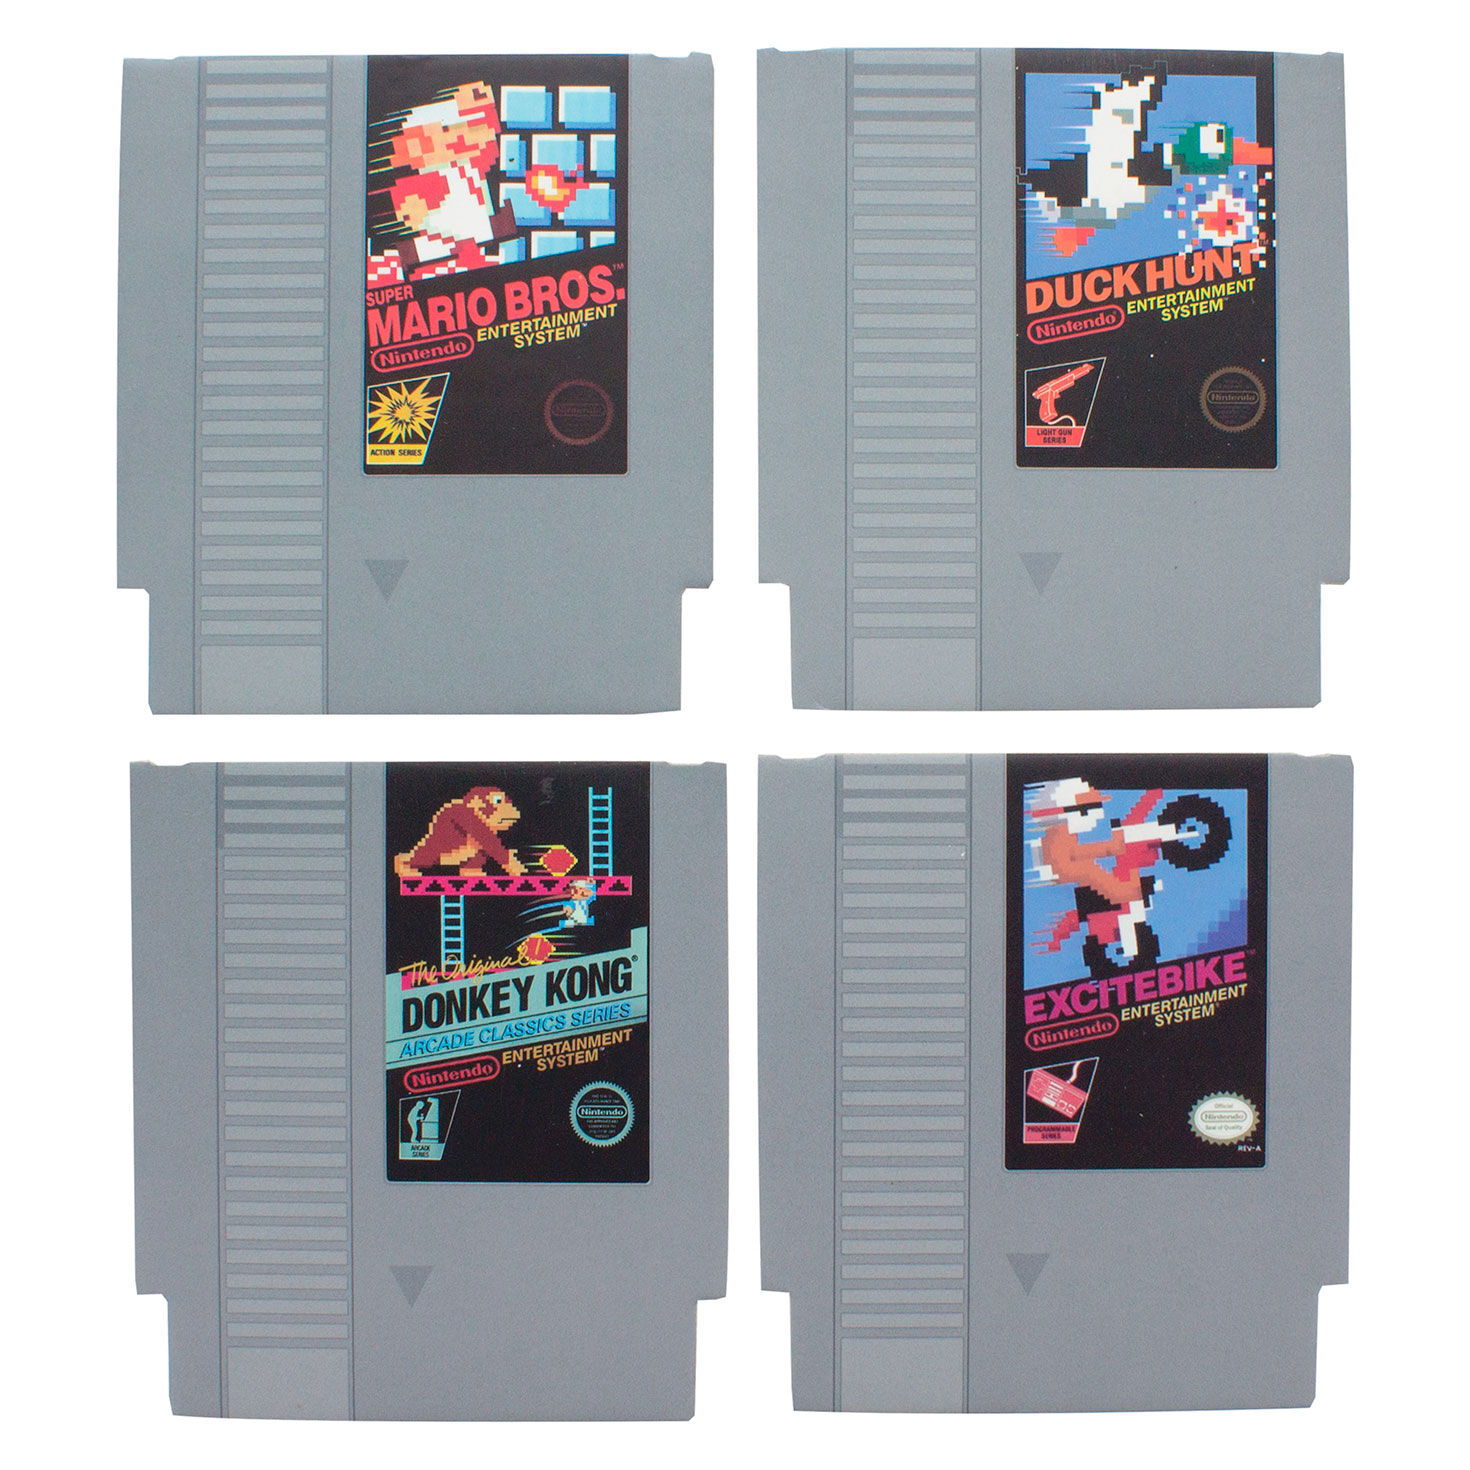 Nintendo Entertainment System Game Cartridge Coasters, Set of 8 for only USD 9.99 | Hallmark